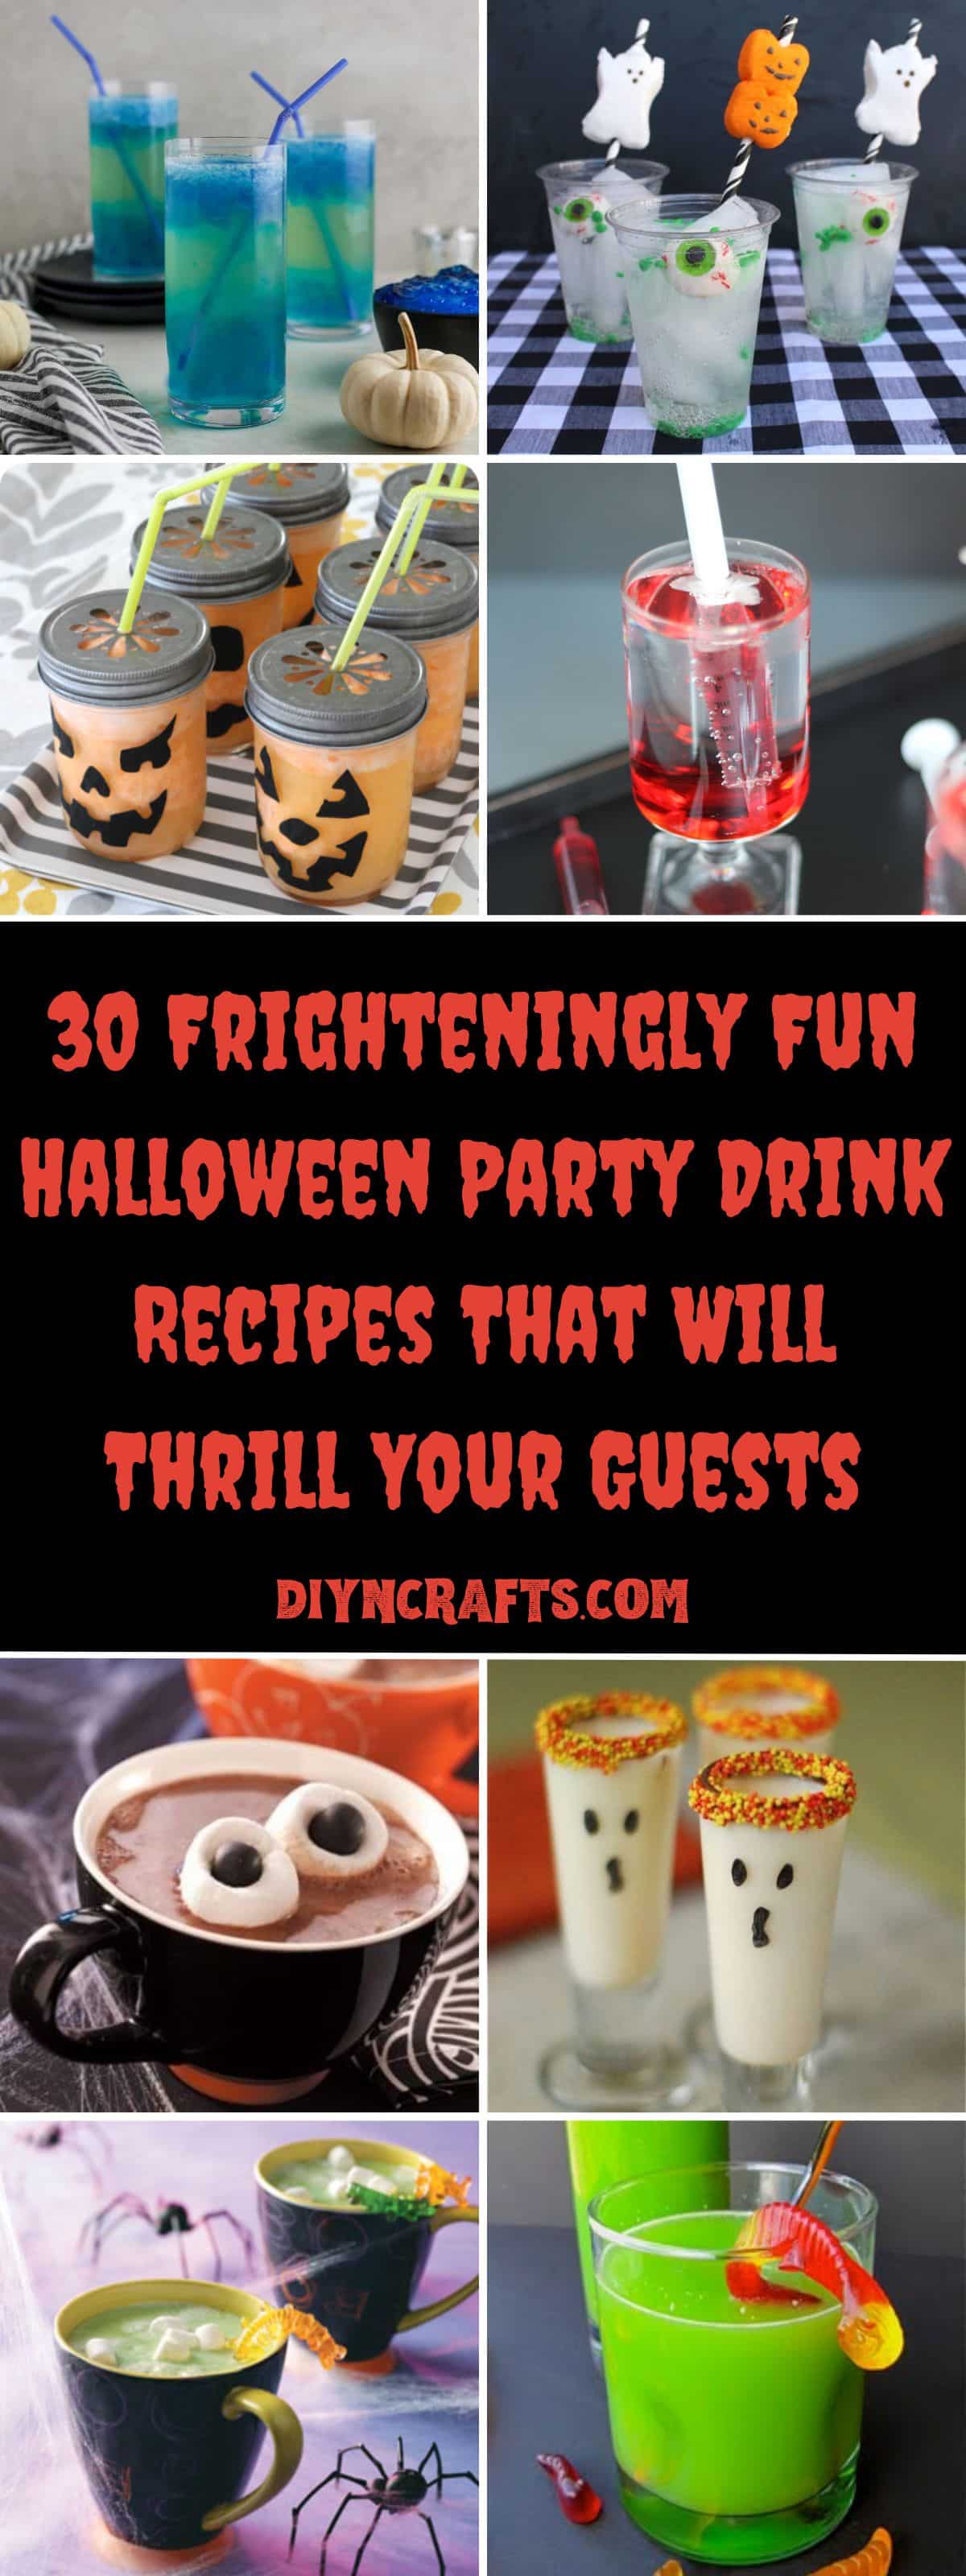 30 Frighteningly Fun Halloween Party Drink Recipes That Will Thrill Your Guests collage.